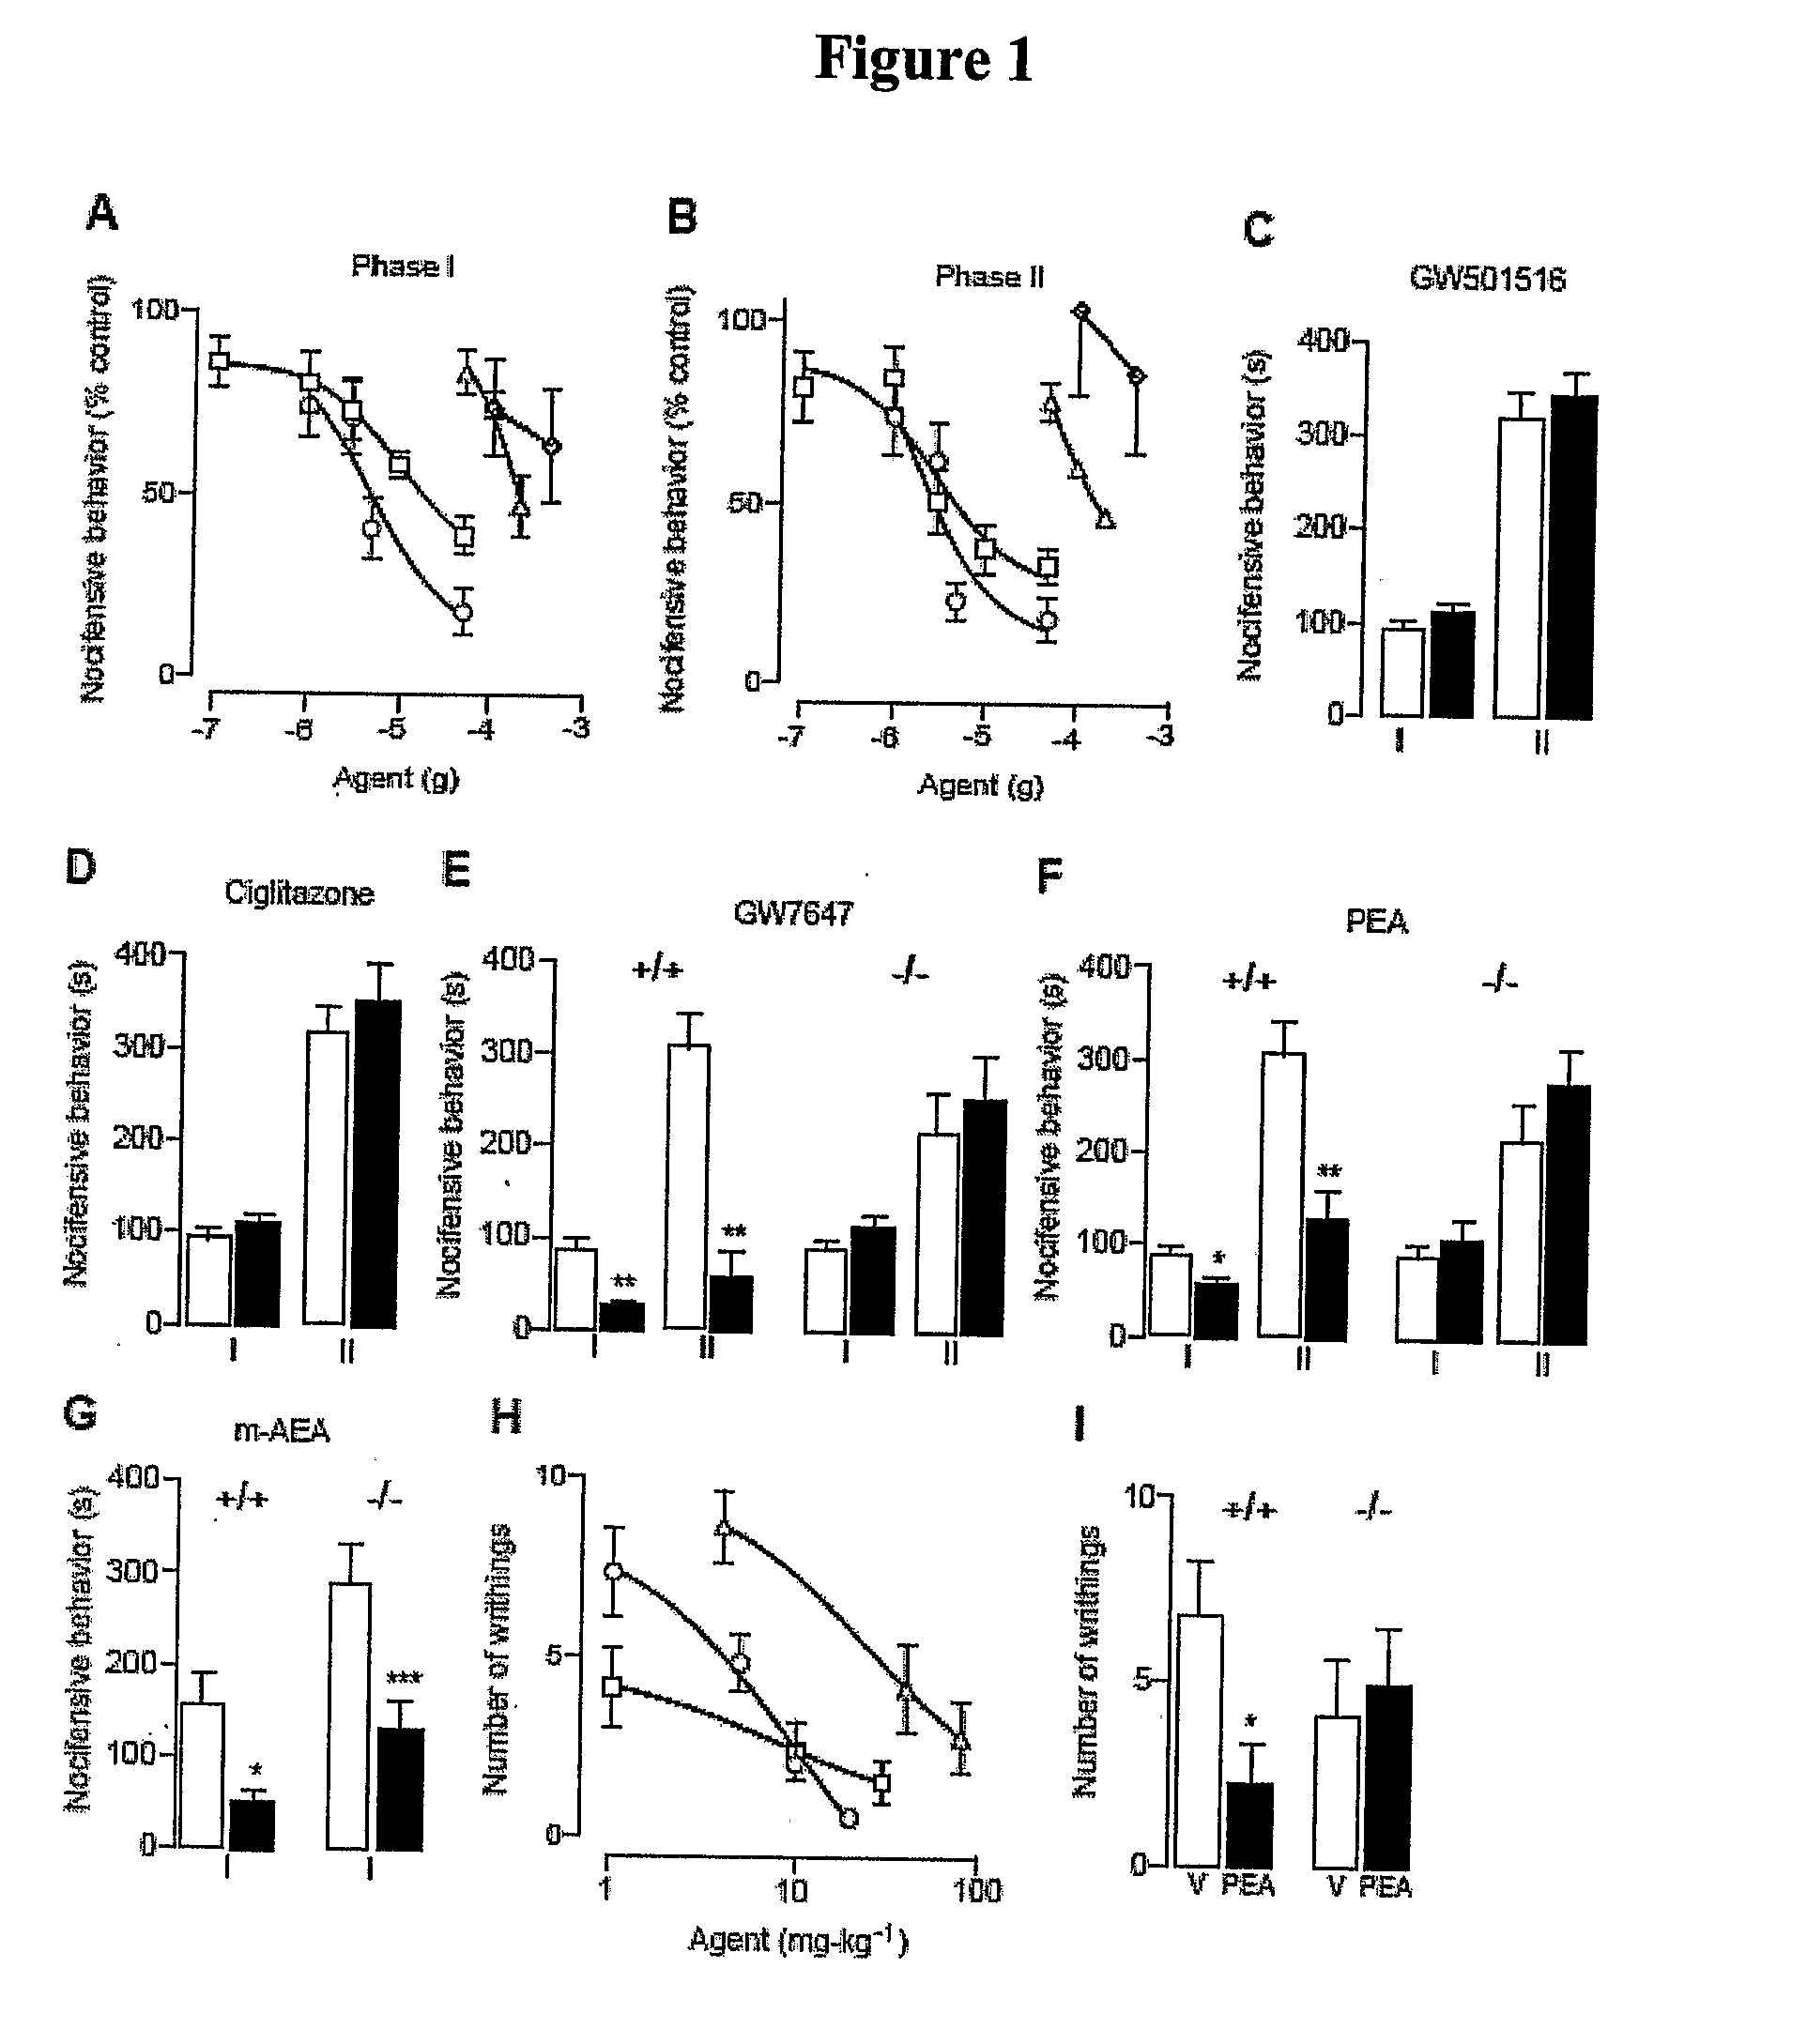 Compounds And Methods For Treating Non-Inflammatory Pain Using Ppar Alpha Agonists